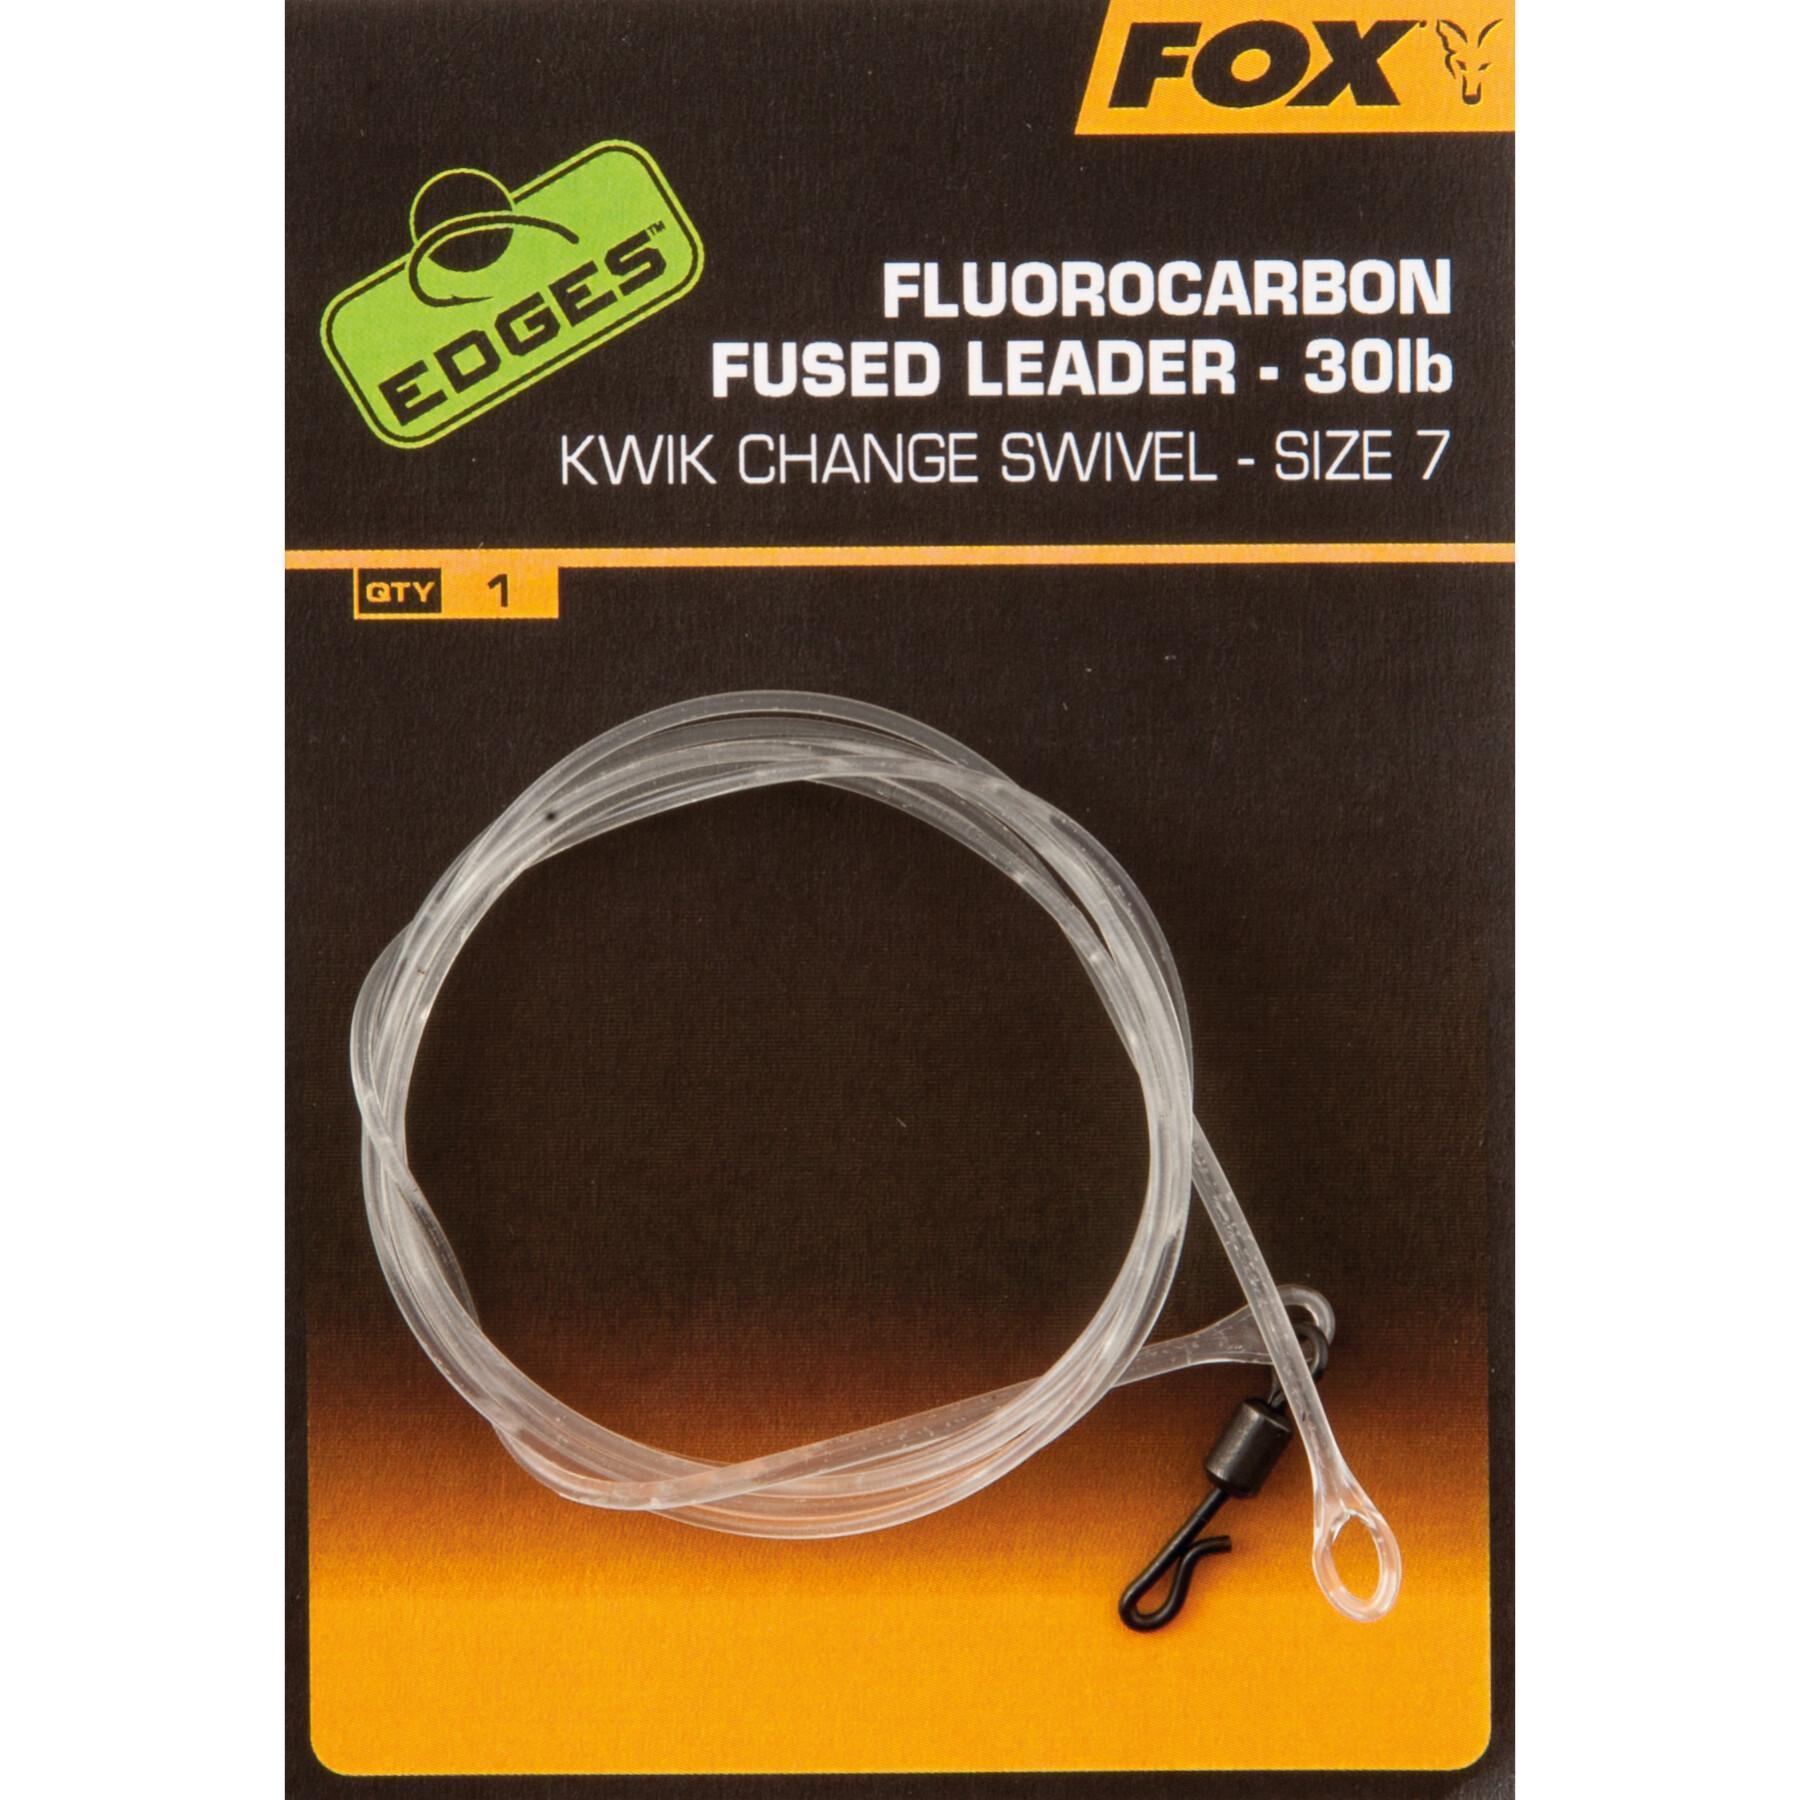 Fluorocarbon wire Fox Fused Leaders taille 7 Edges